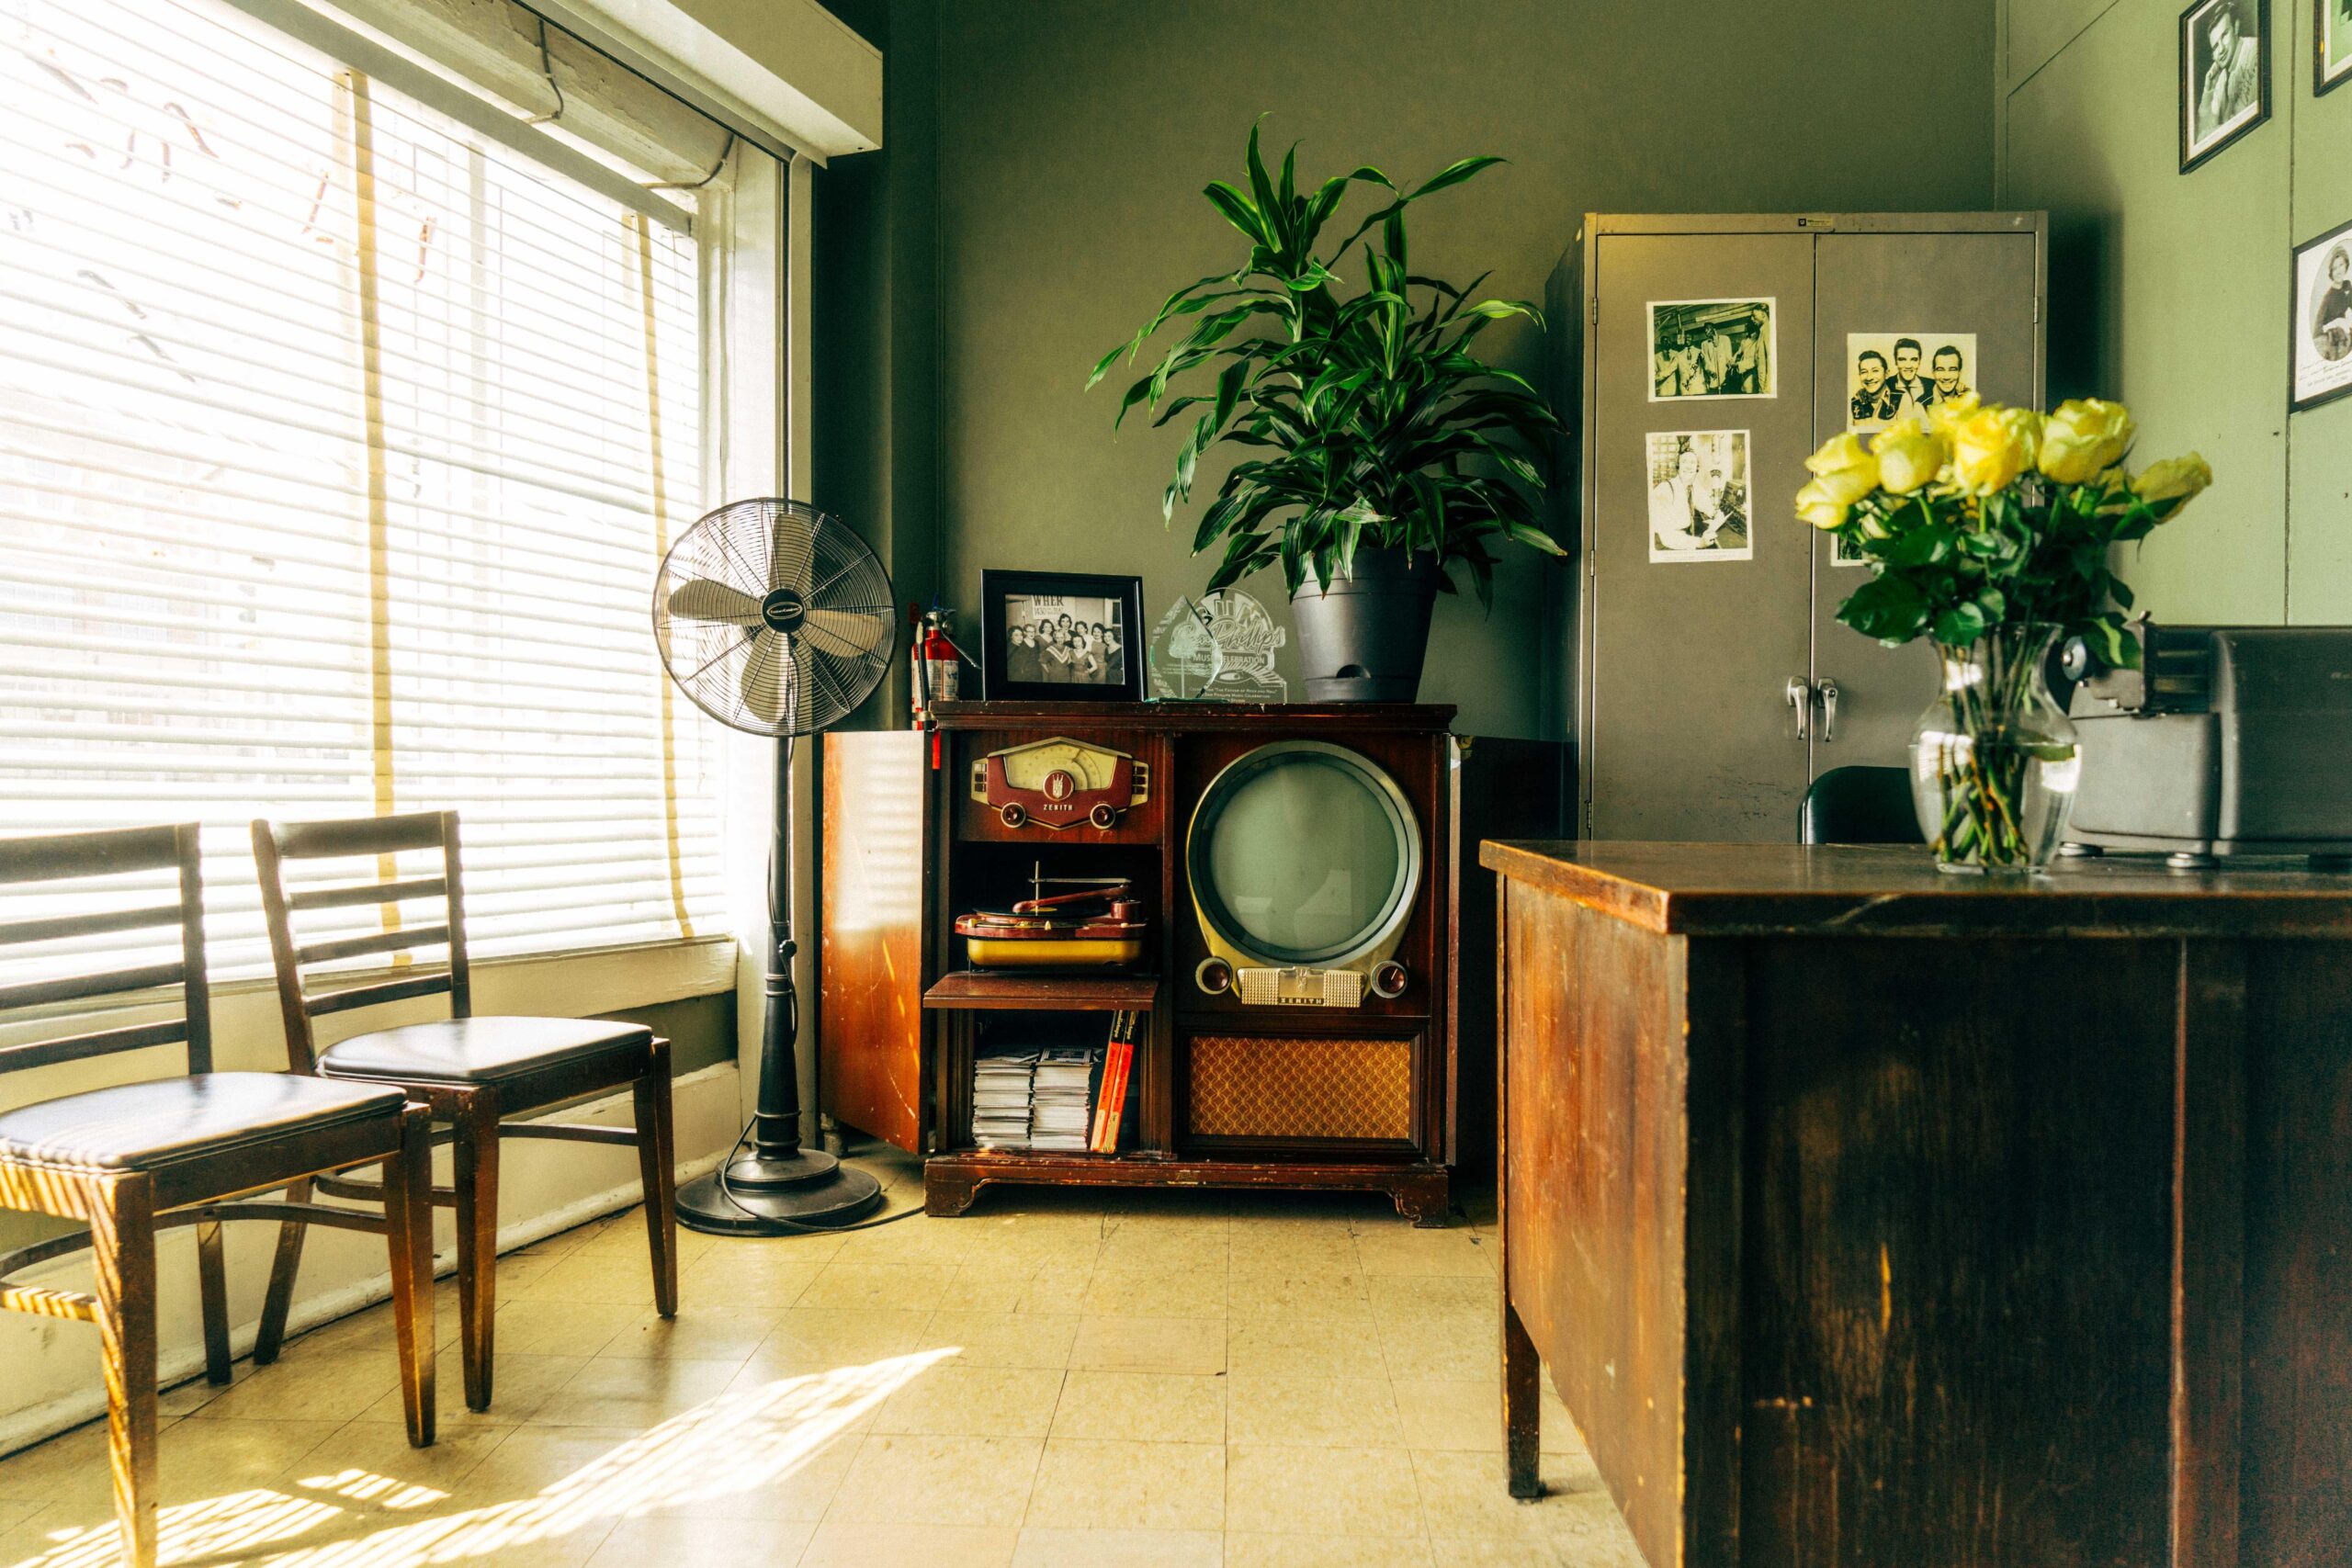 How To Choose A Fan For Your Home Office